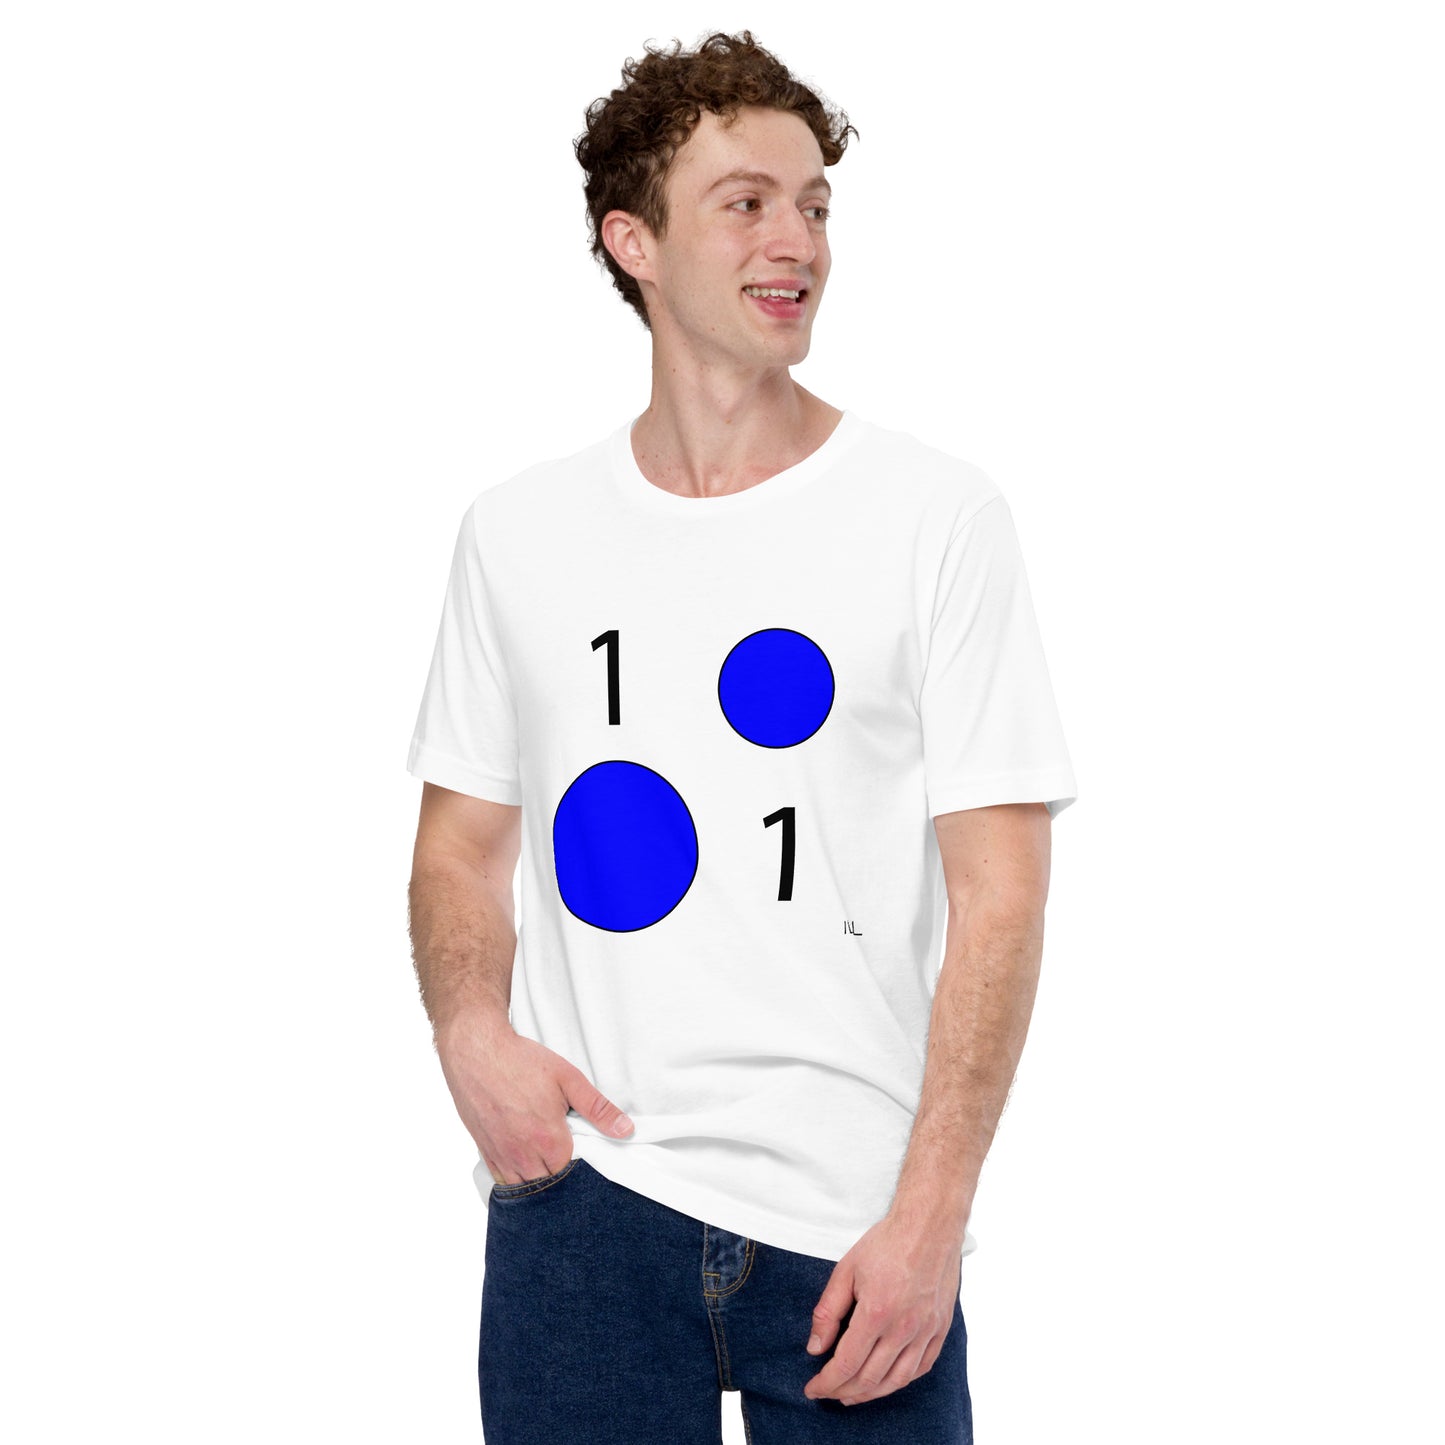 January 1st Blue T-Shirt at 1:01 101 0101 Front